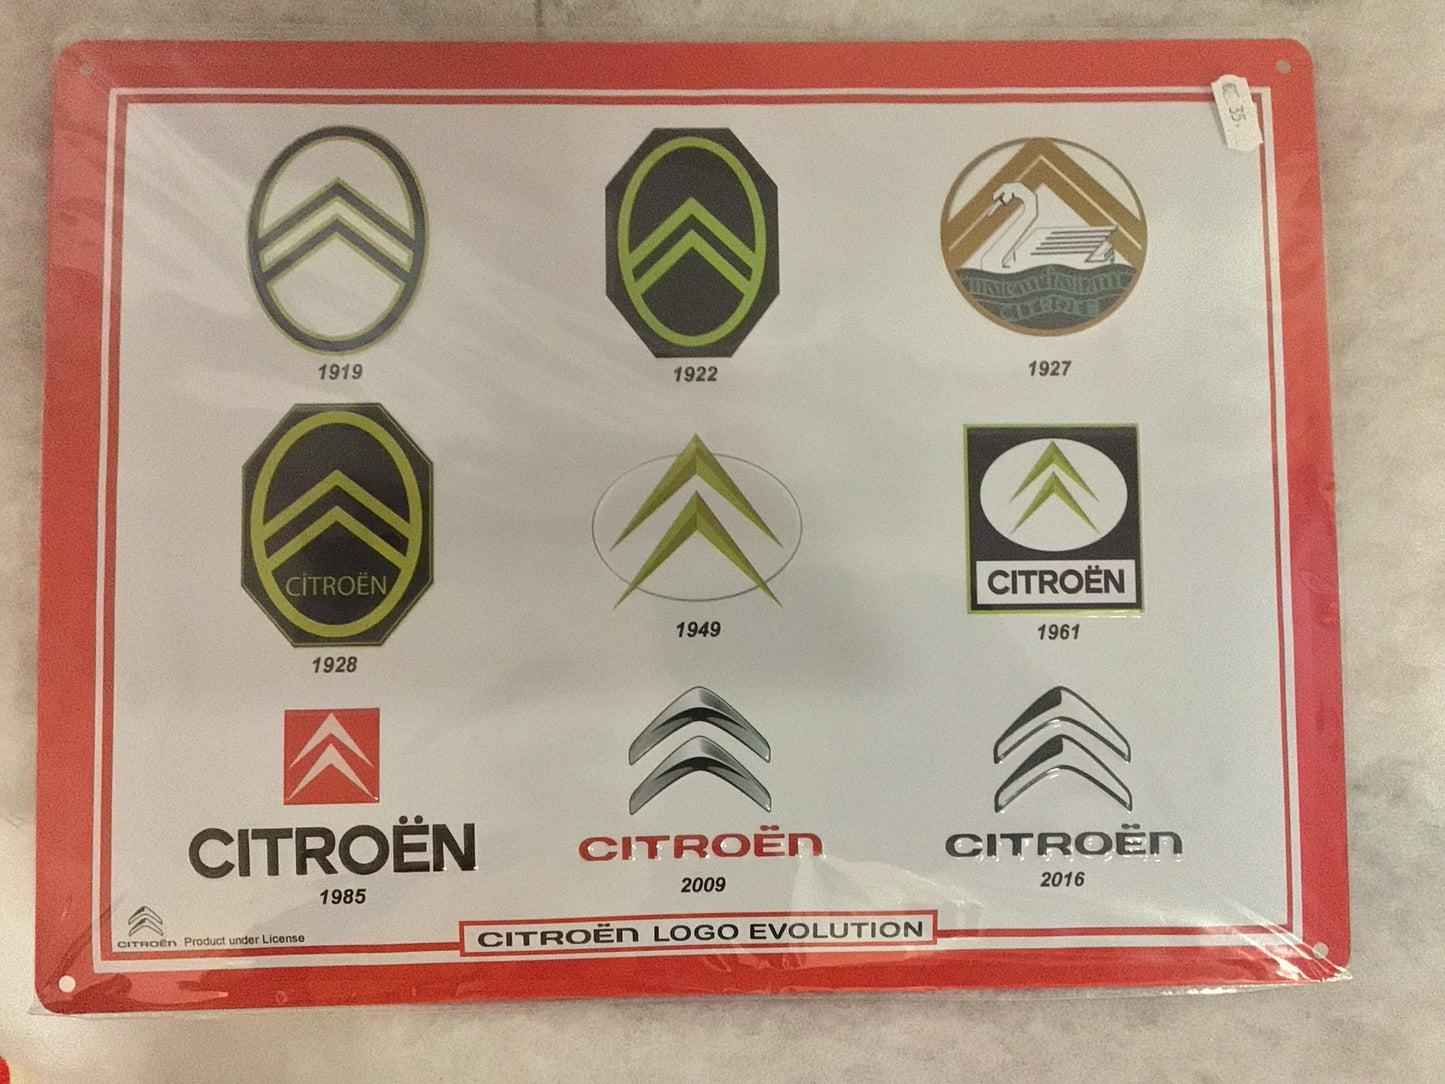 Citroën metal plates with reliefs